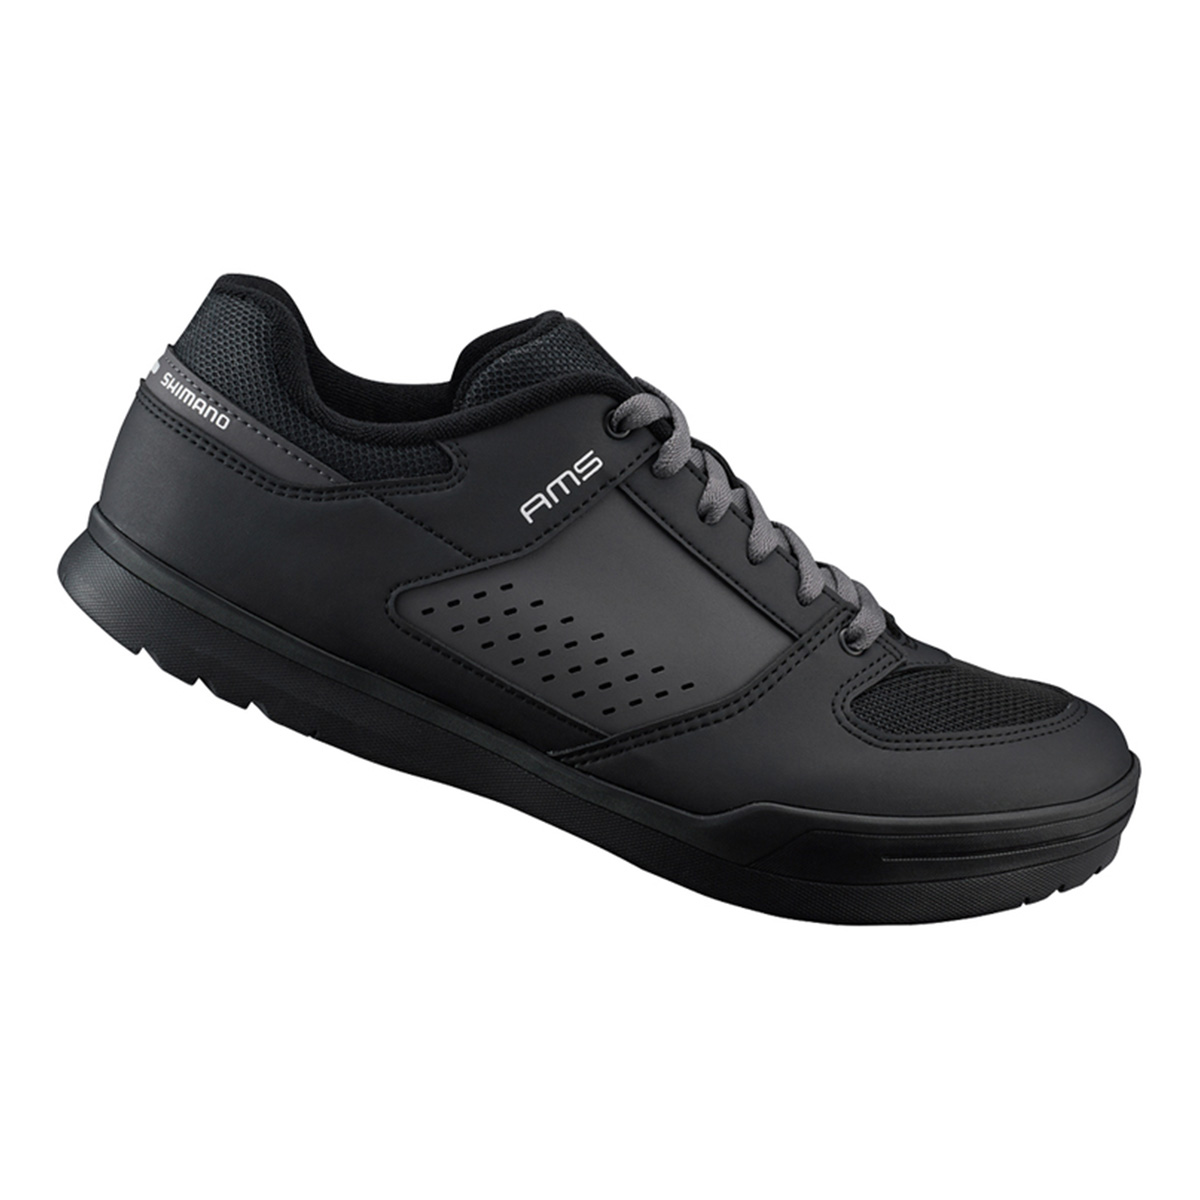 Chaussures Shimano AM501